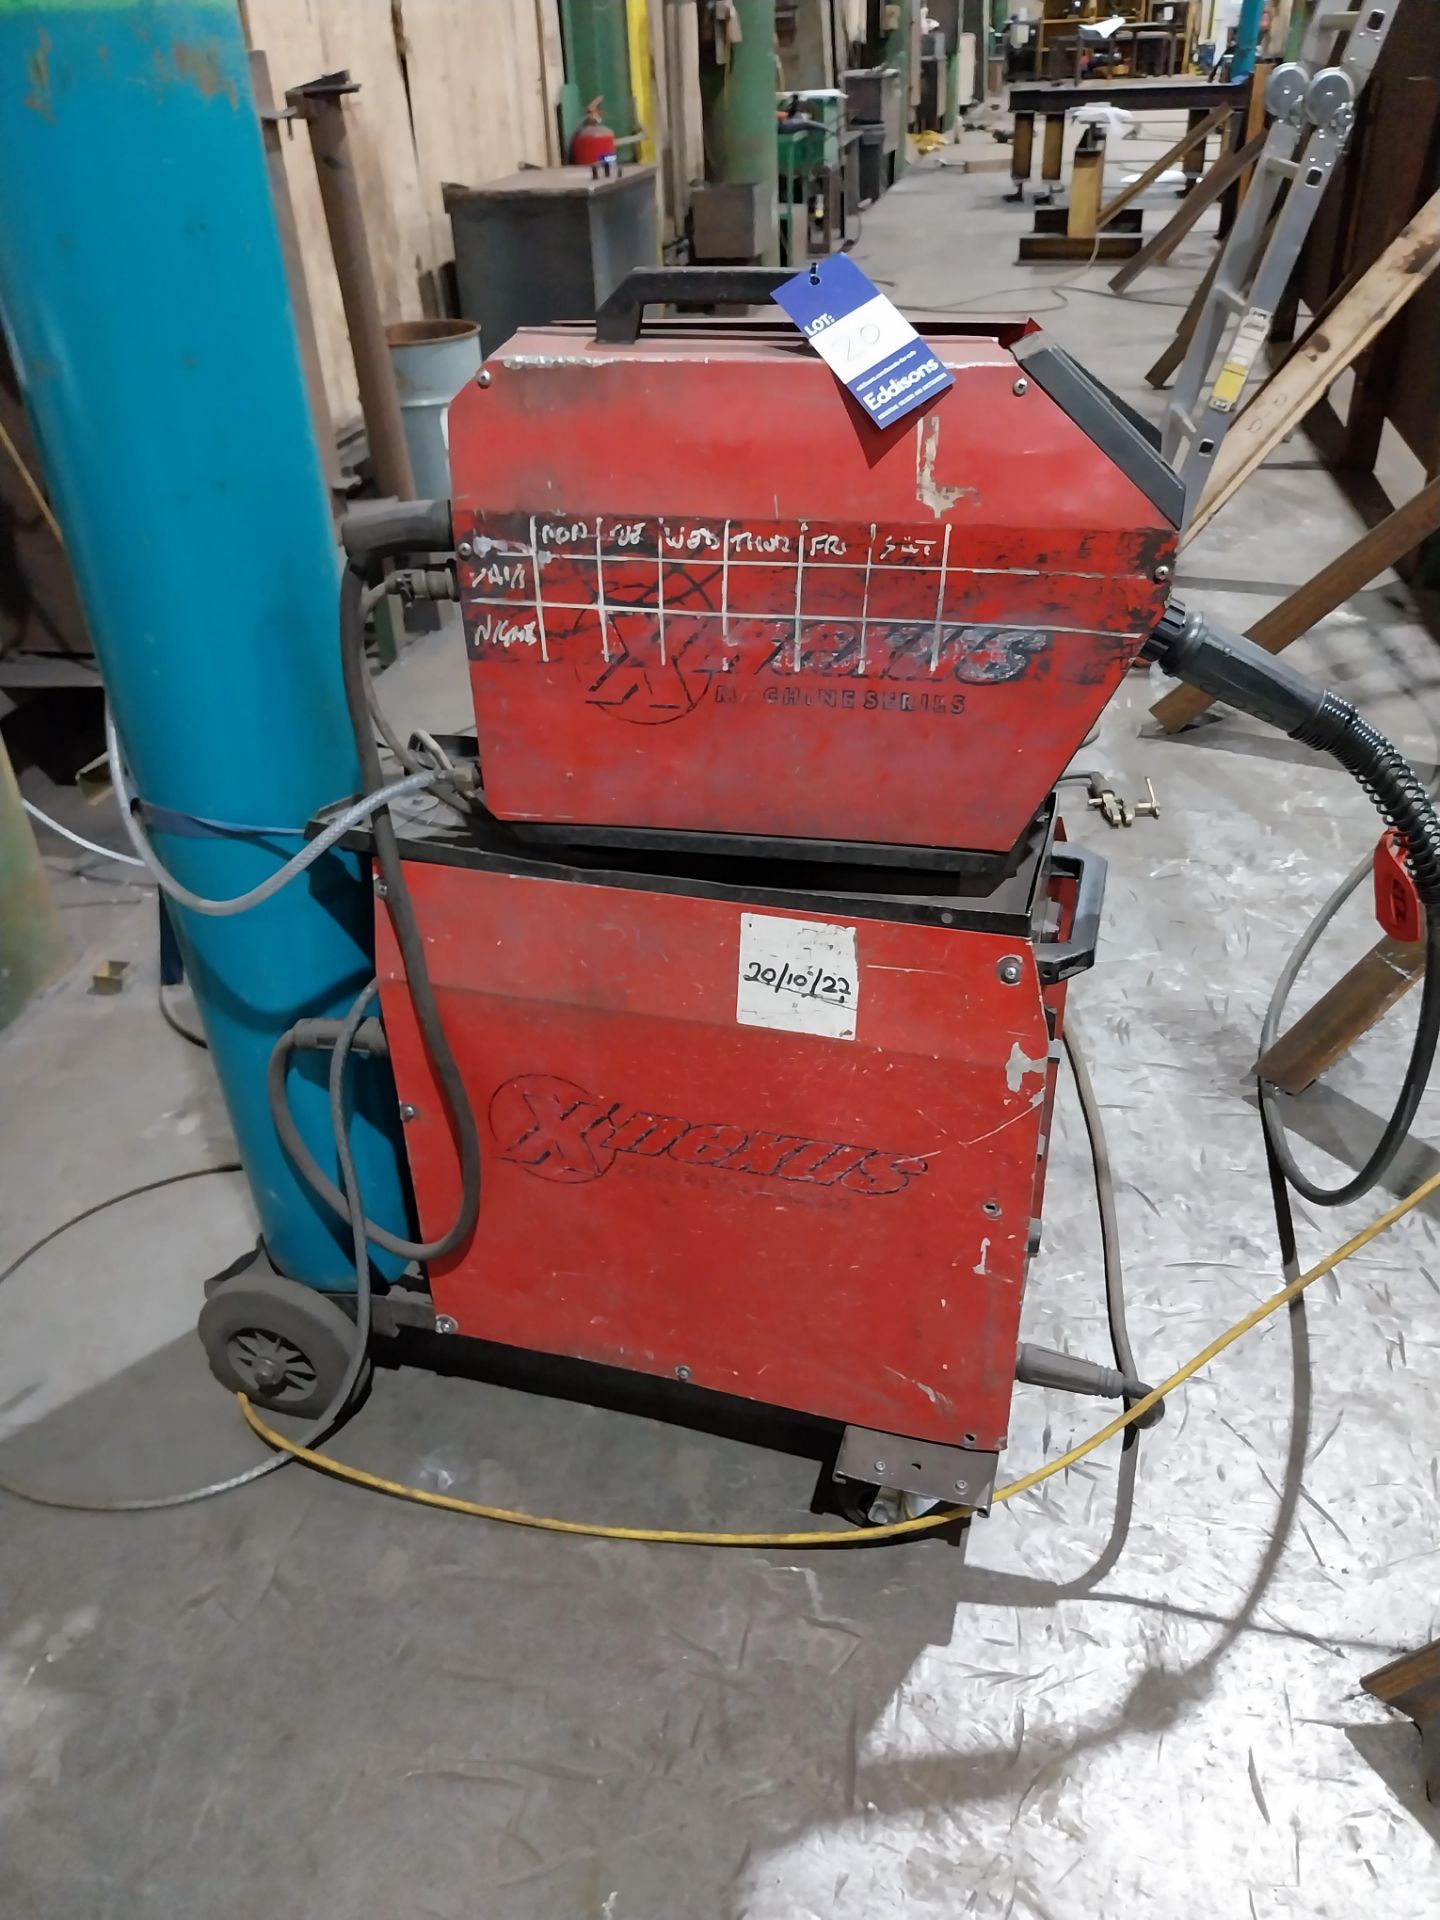 Nexus NXM400 mig welder and wire feed, torch and clamp (bottle not included) - Image 2 of 7